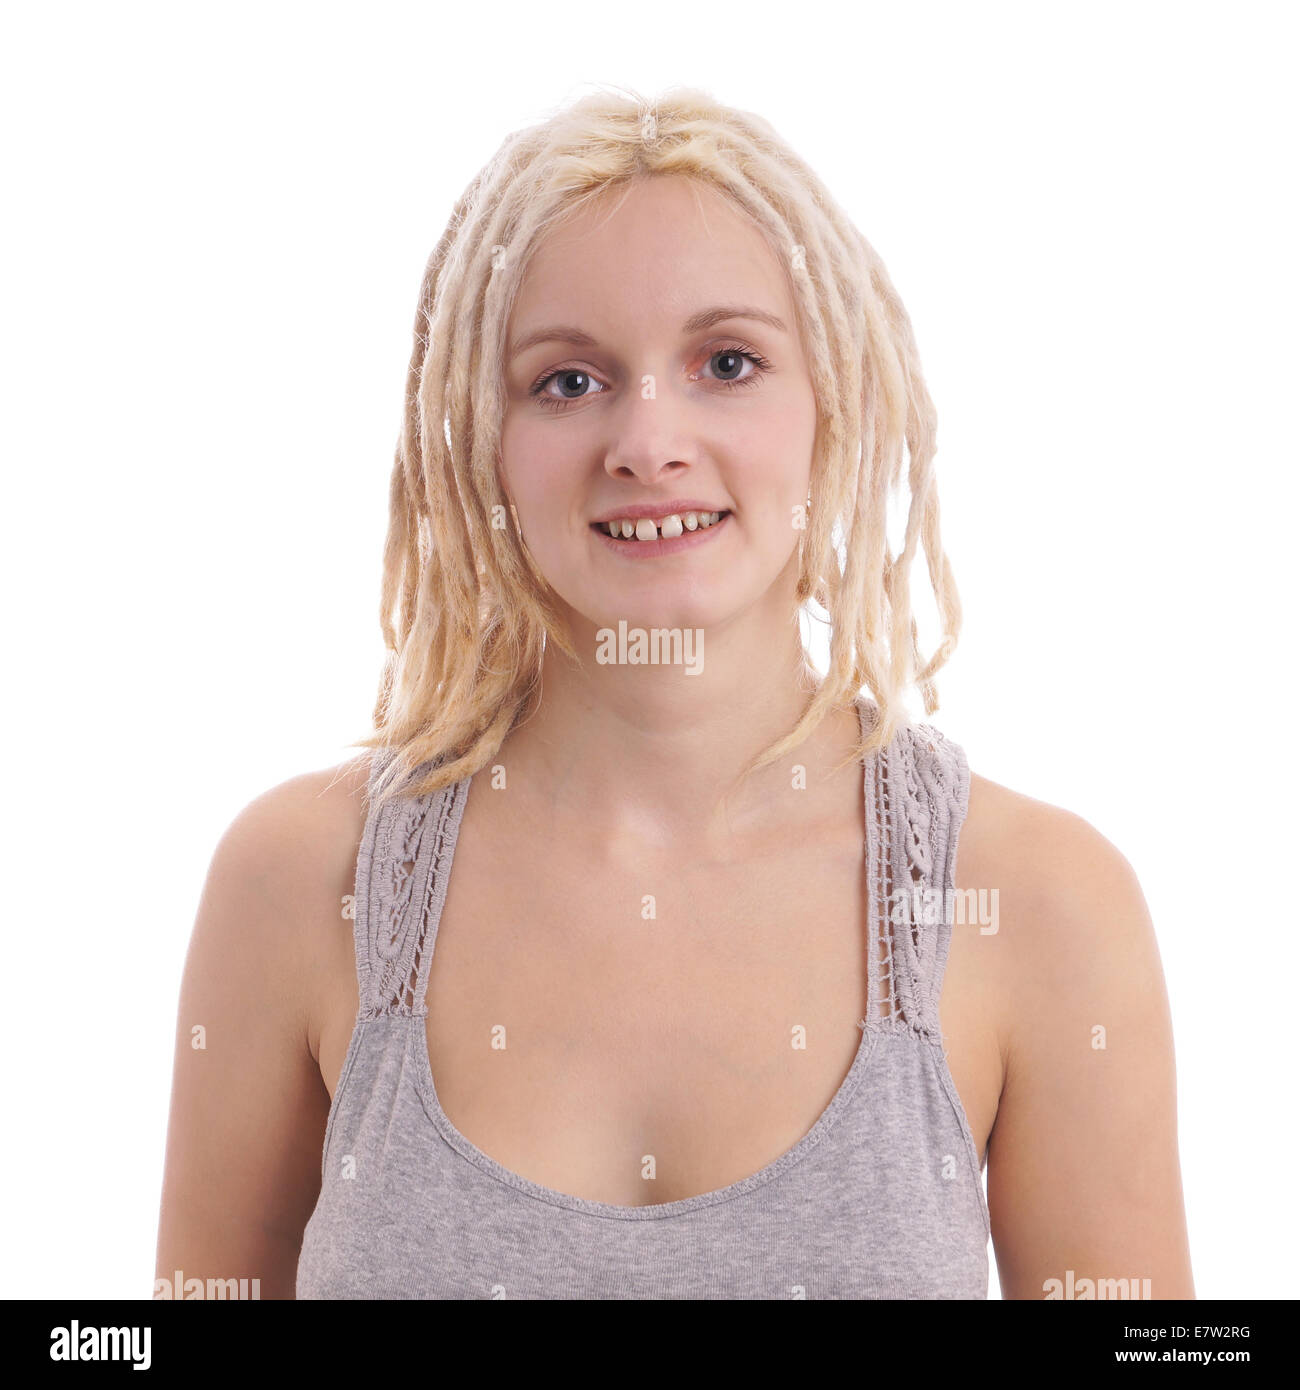 happy young woman with blonde dreadlocks or dreads Stock Photo